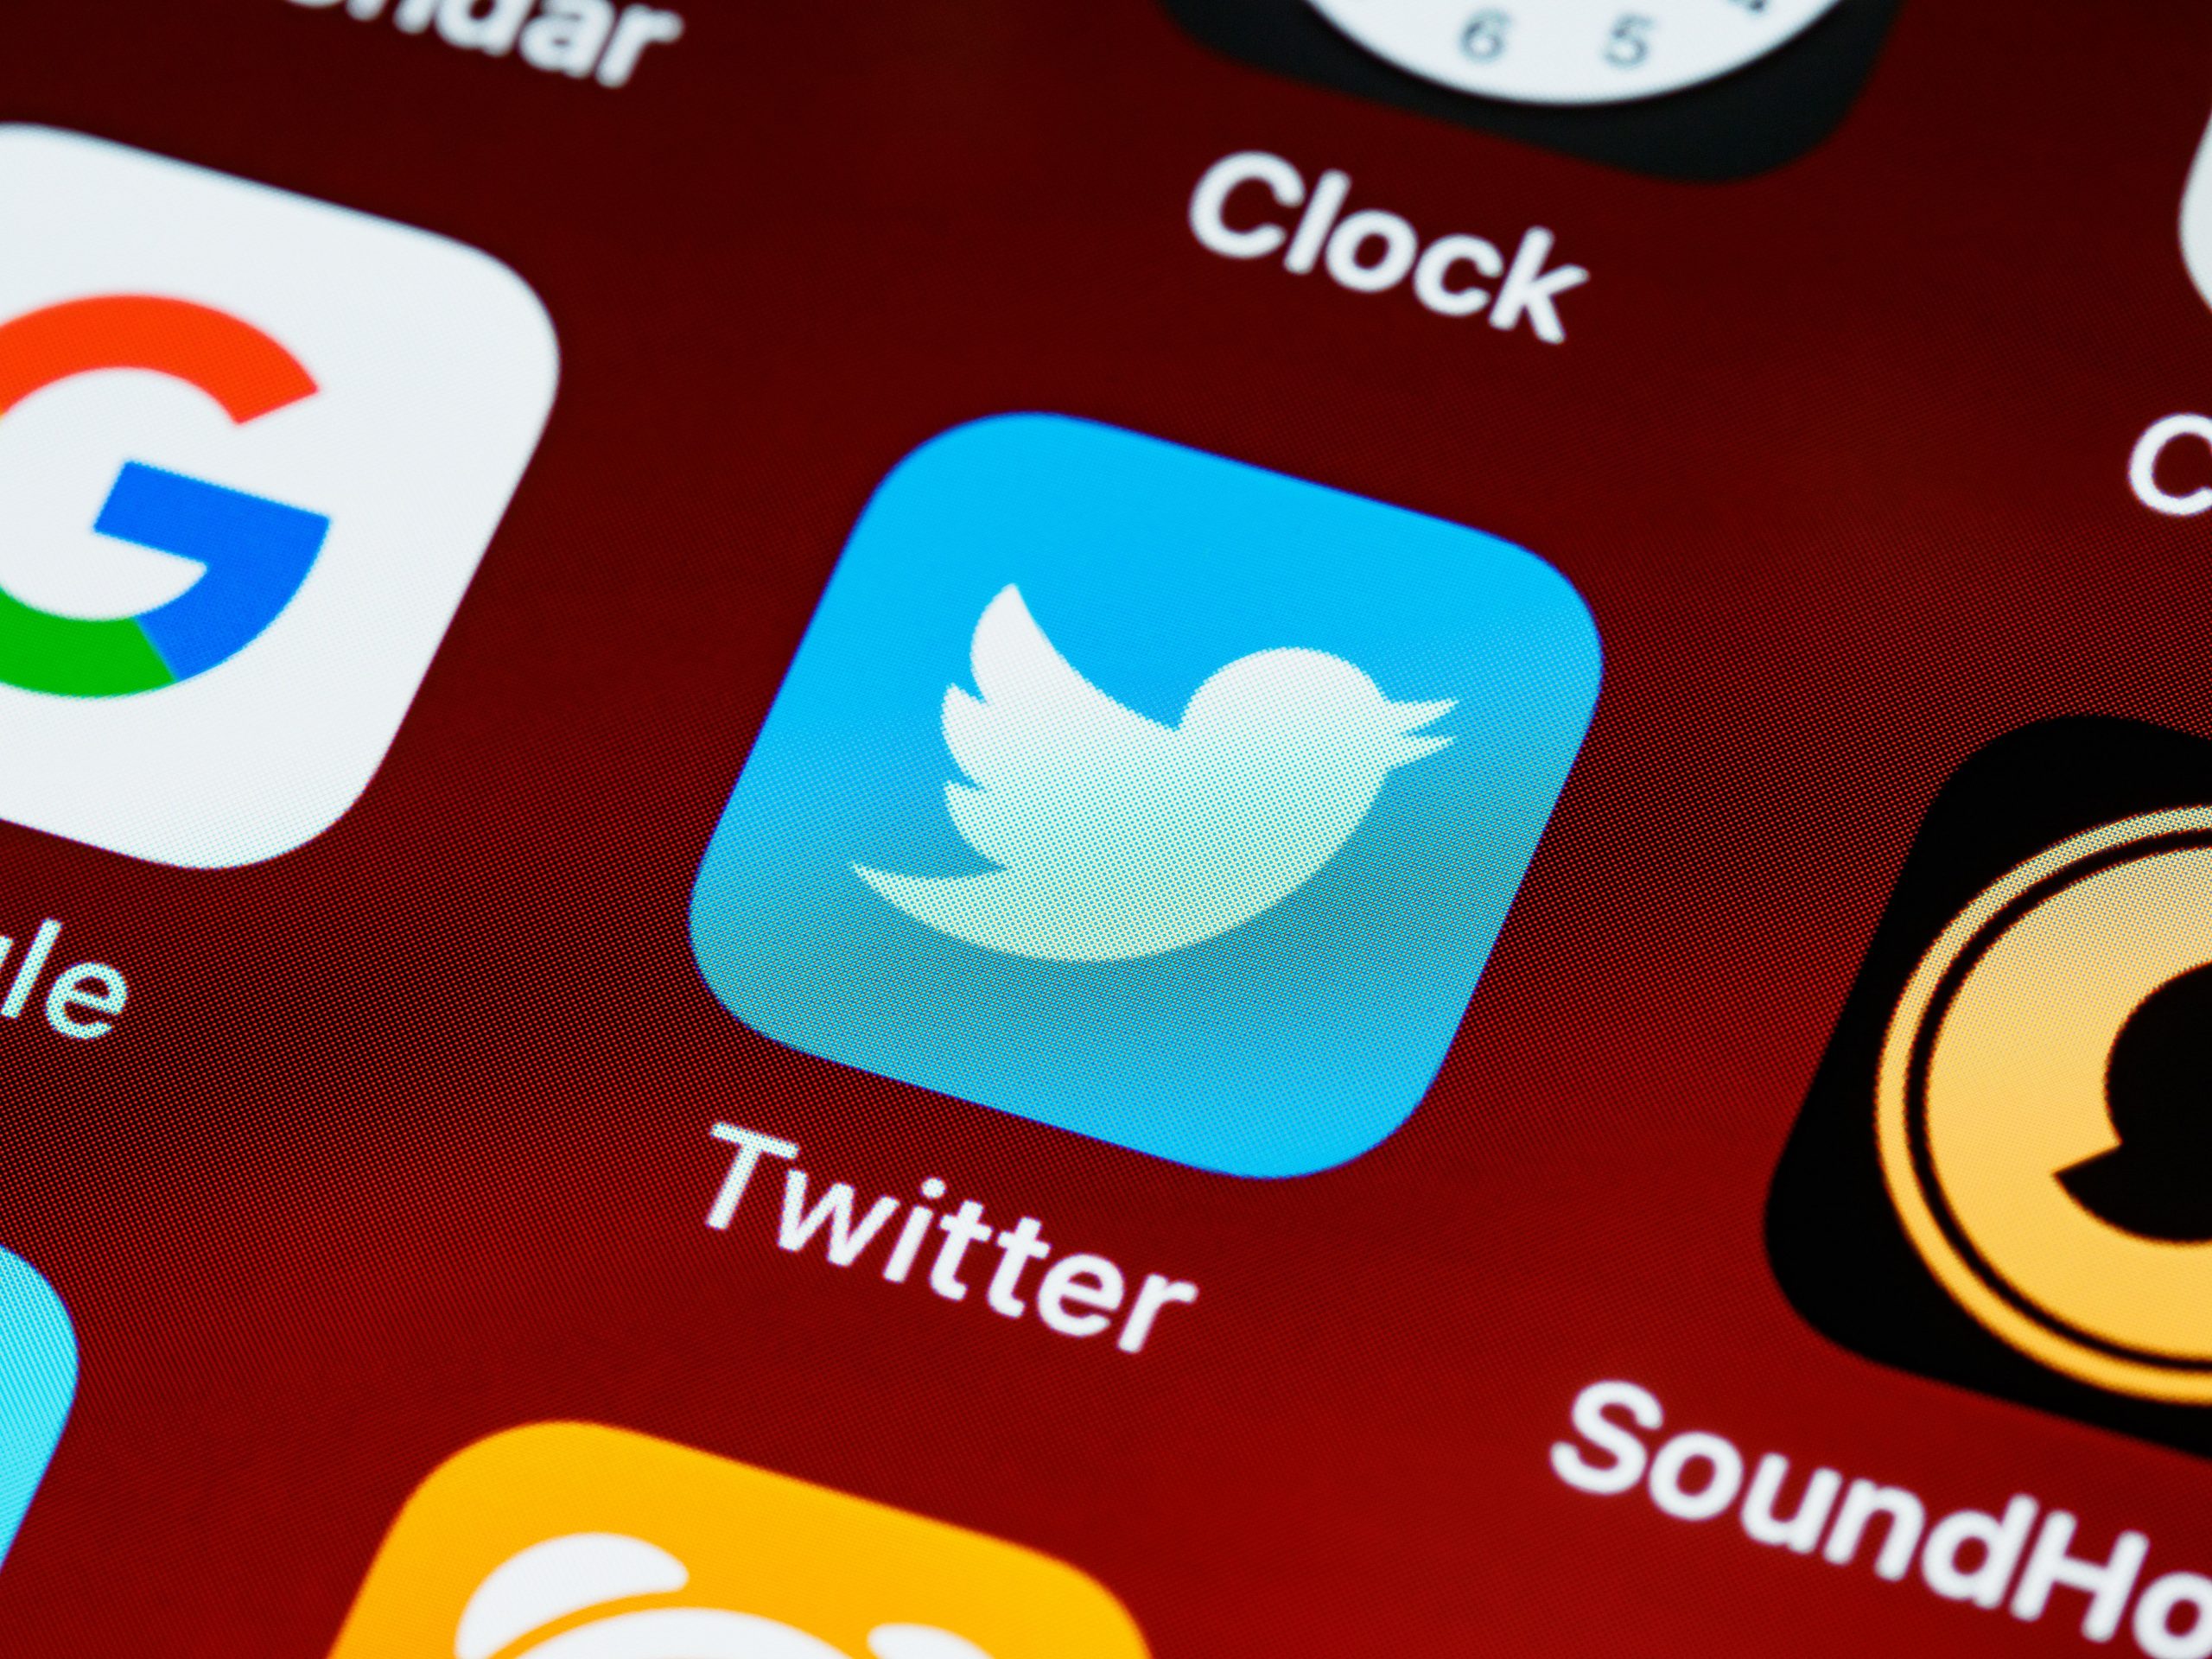 Parliamentary panel tells Twitter ‘rule of land supreme’, not their policy